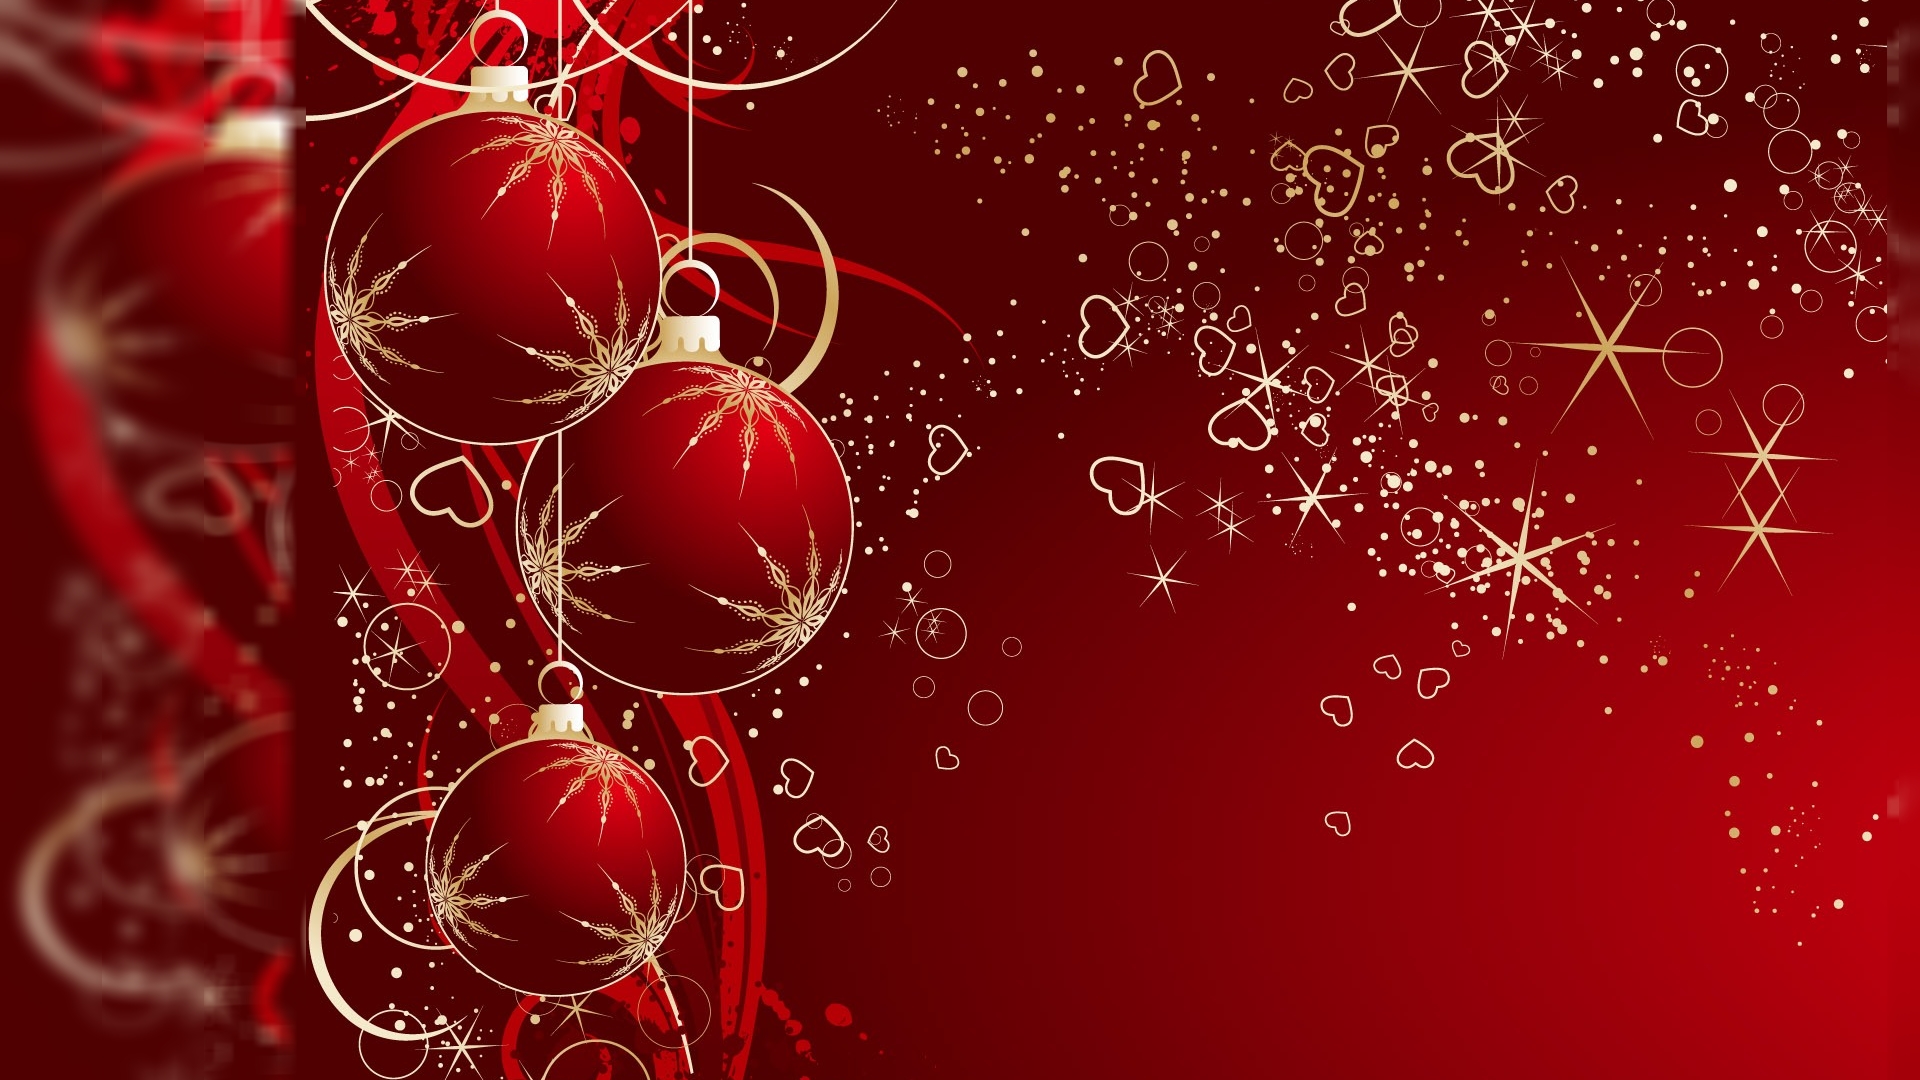 Christmas Pictures For Desktop Background On